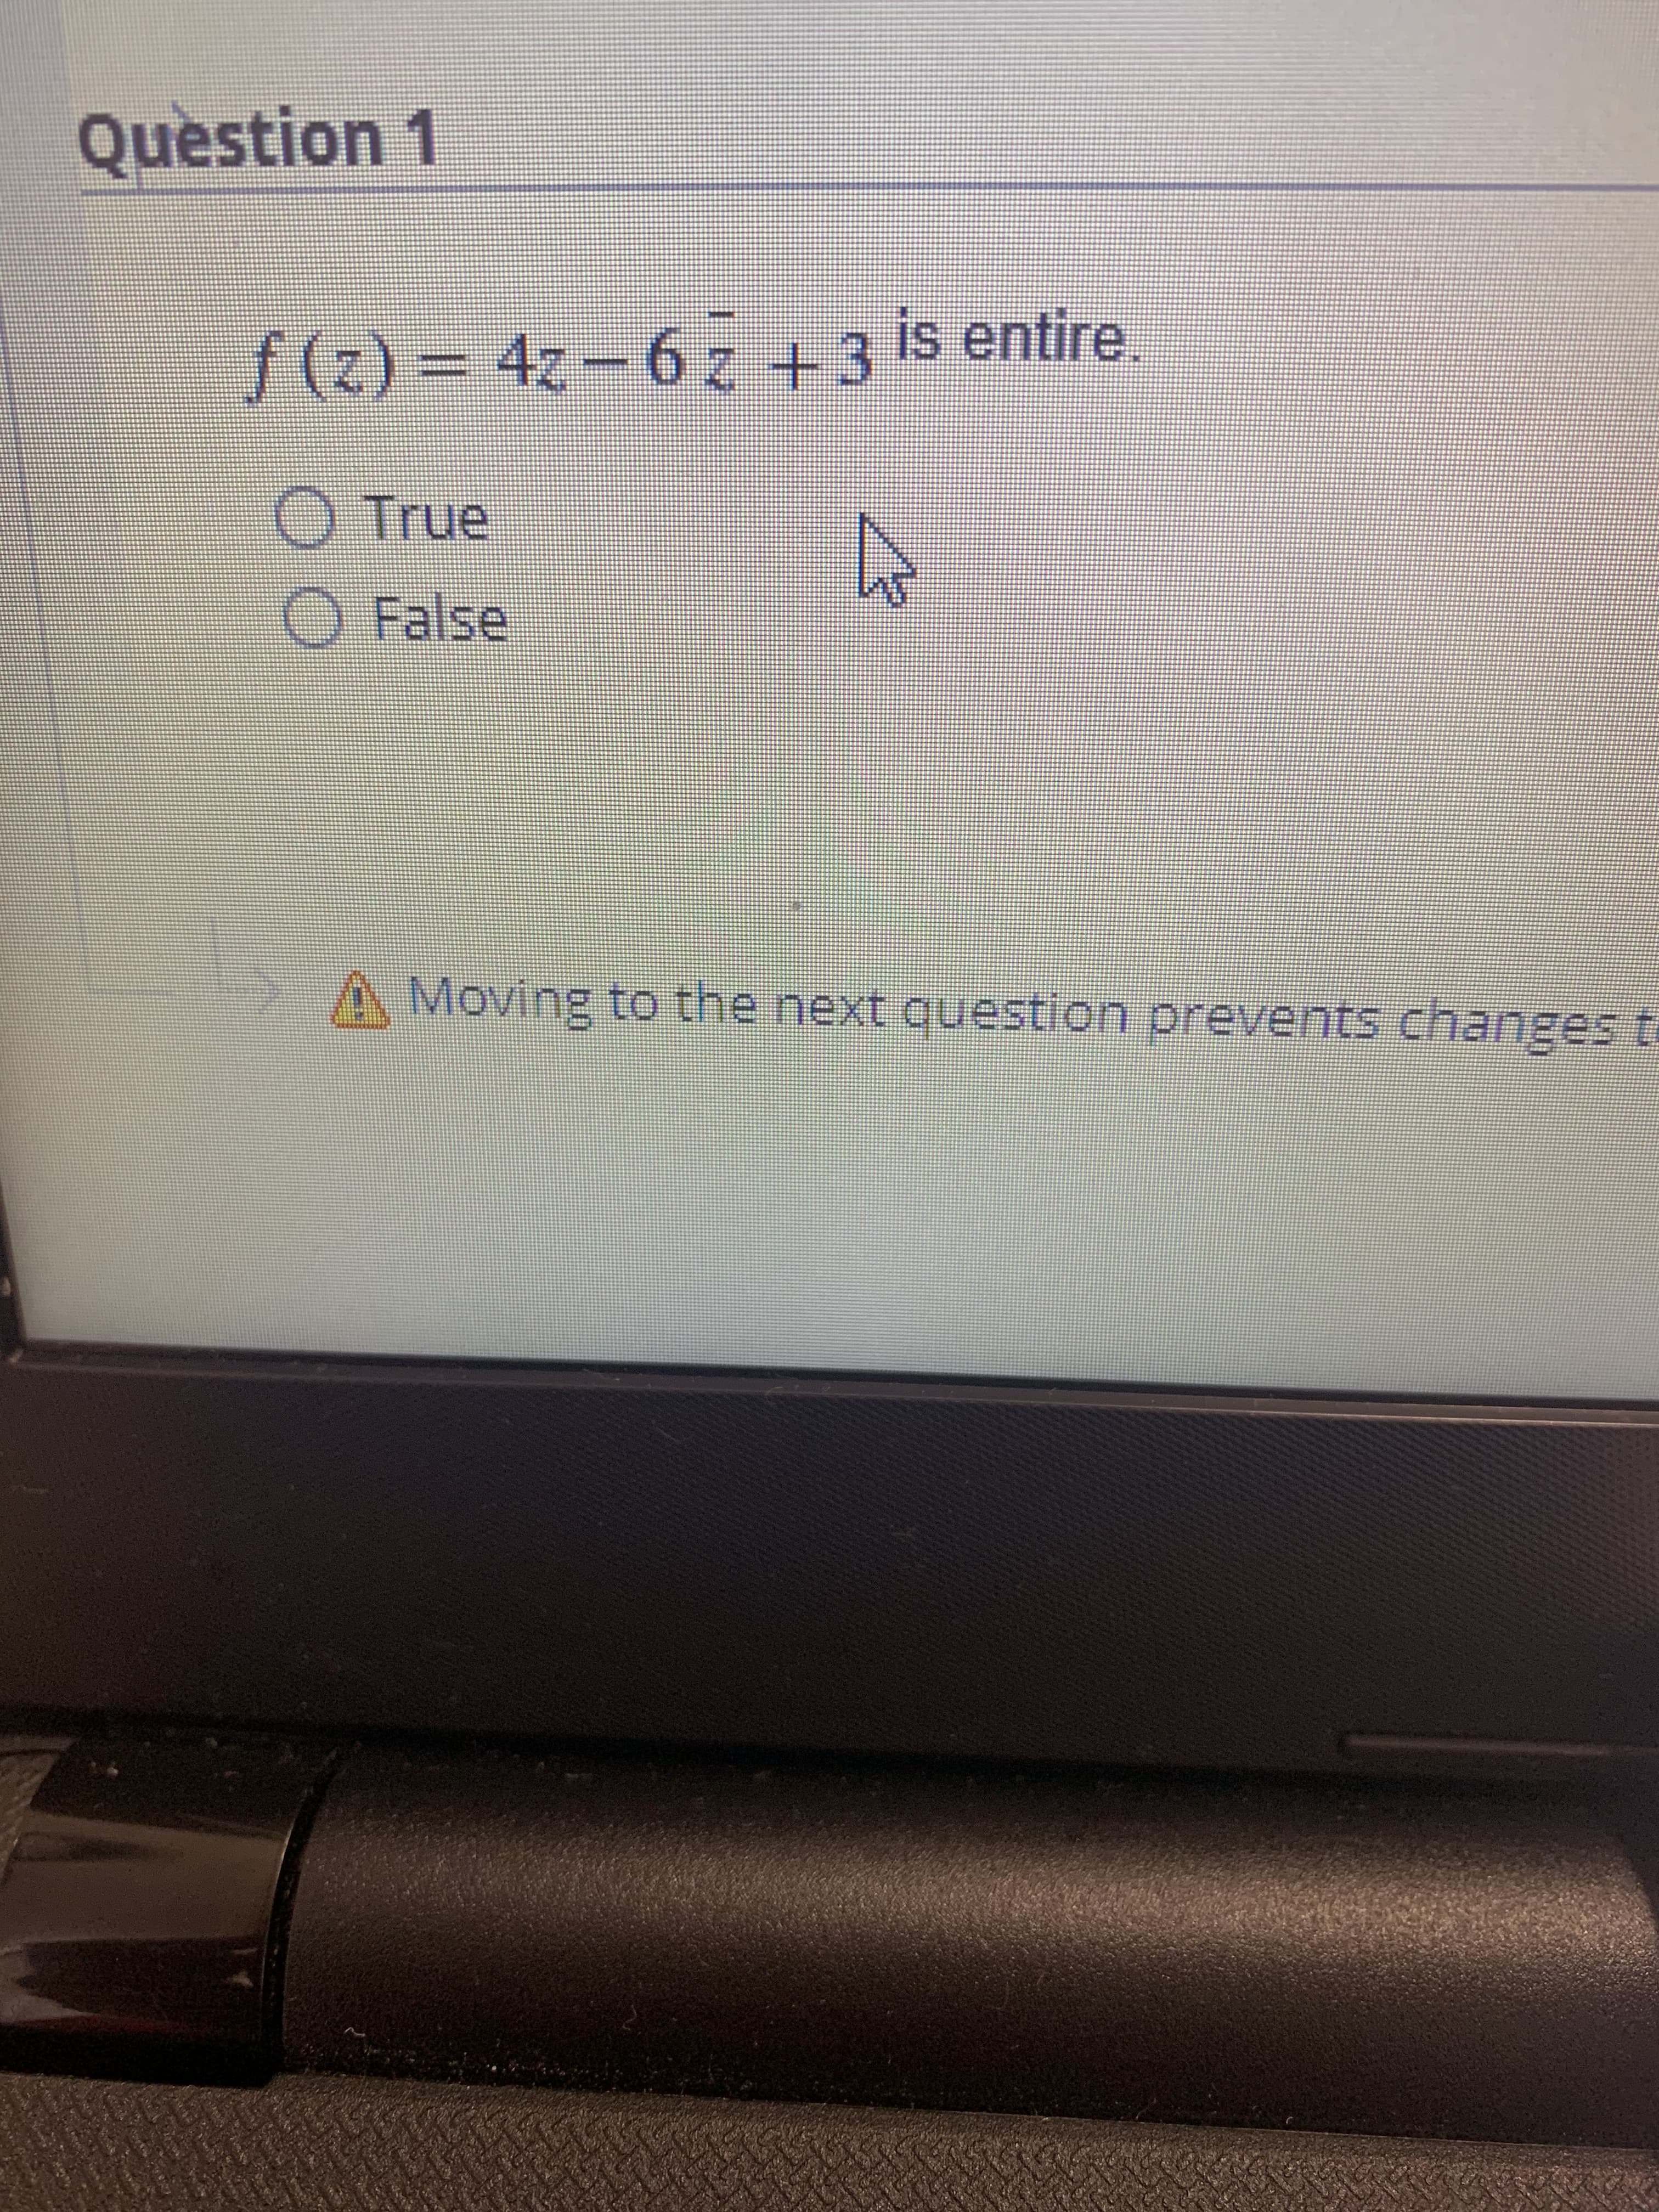 Question 1
f(z)%3D 4z-6 z +3
is entire,
O True
O False
A Moving to the next question prevents changes t
